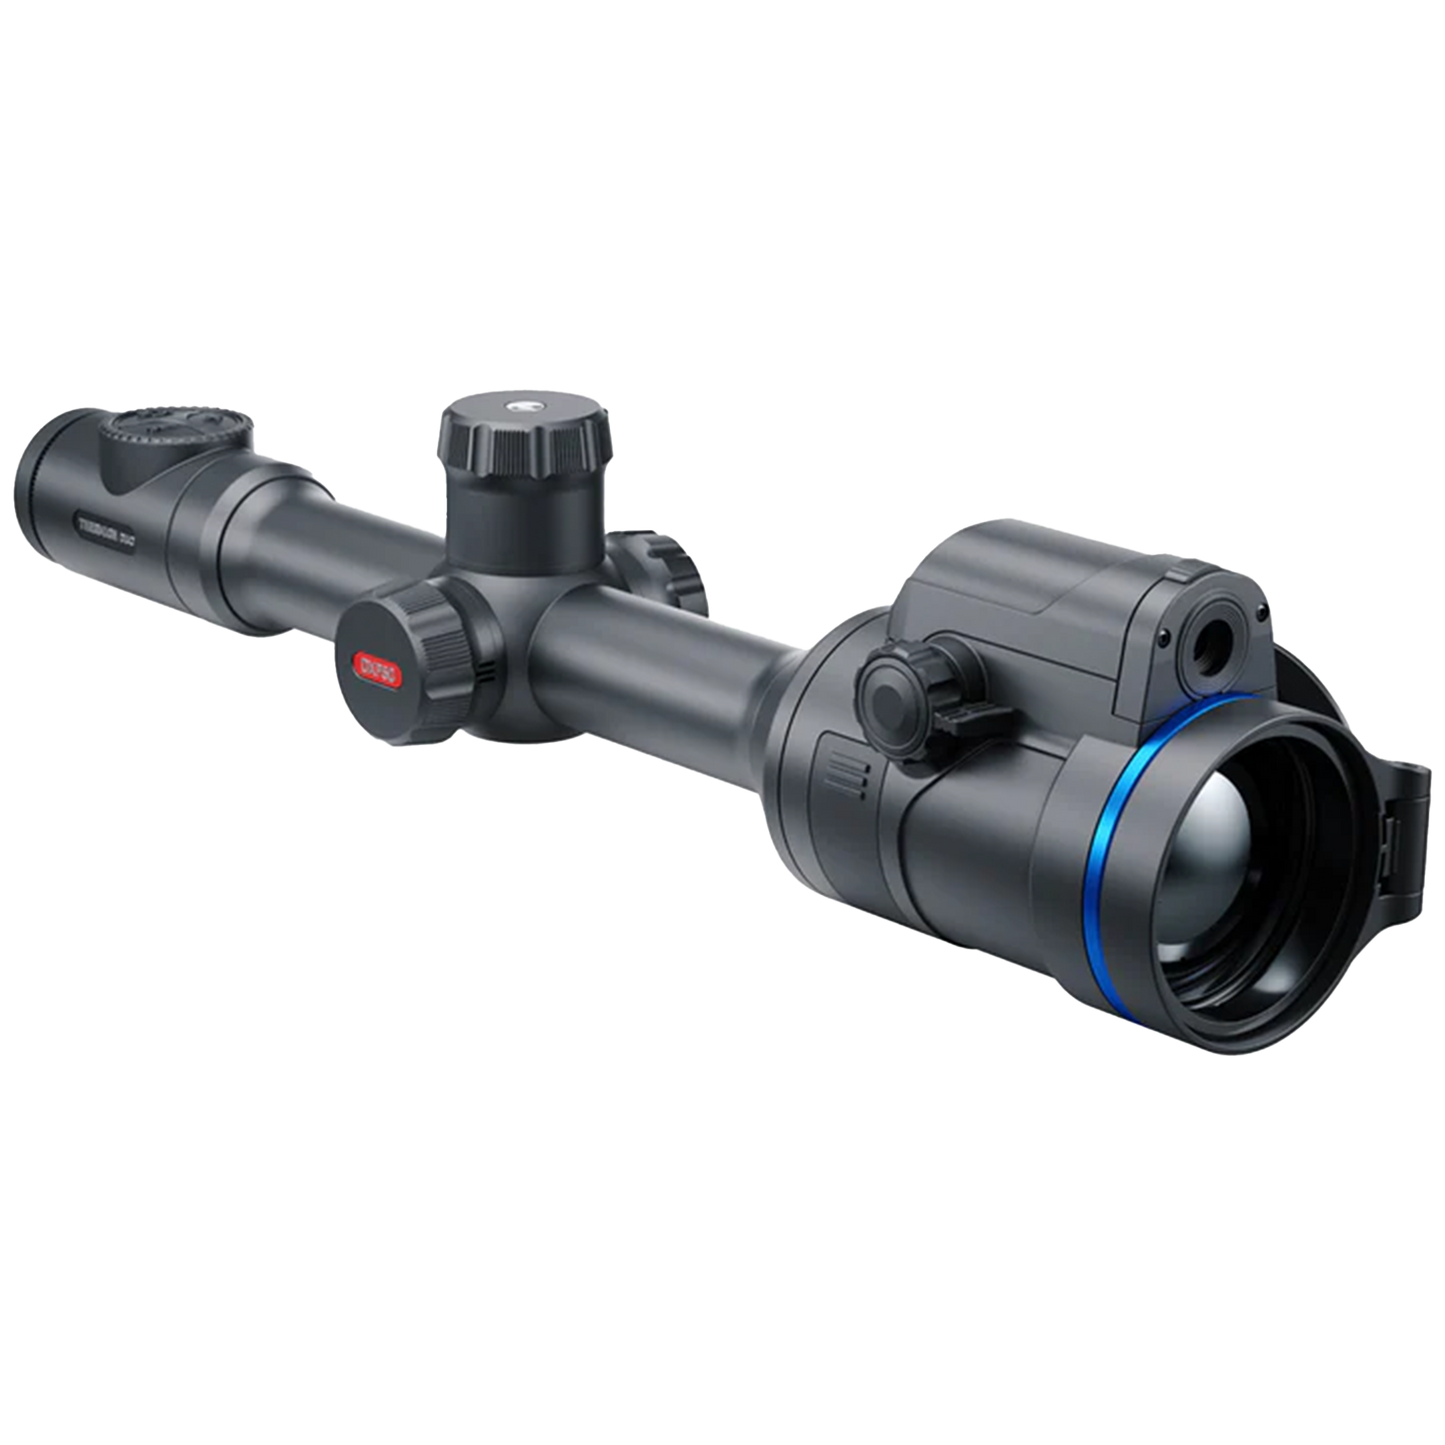 Pulsar Thermion Duo DXP50 Thermal Riflescope with 2X magnification day camera